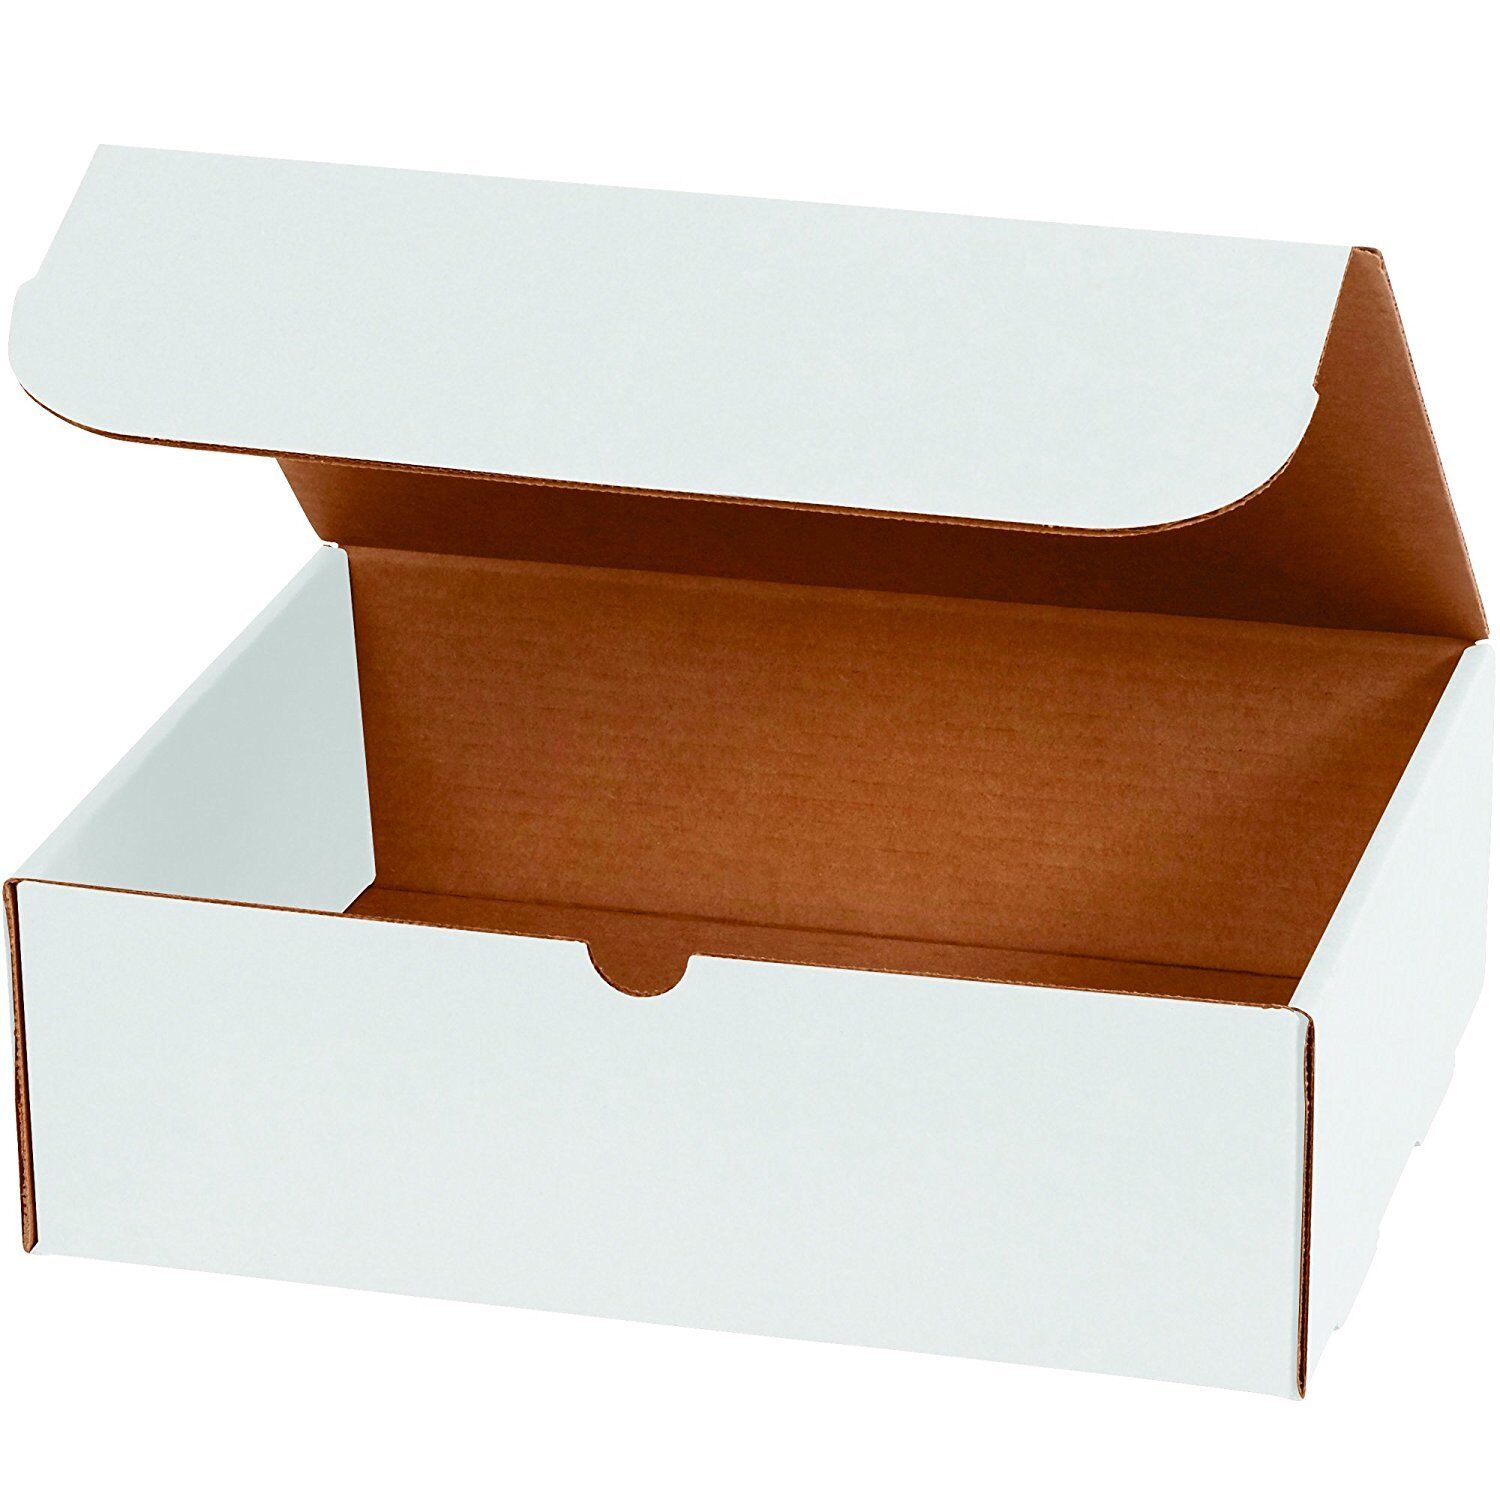 7x2x2 White Corrugated Shipping Mailers Packing Box Boxes Folding 100 To 1000